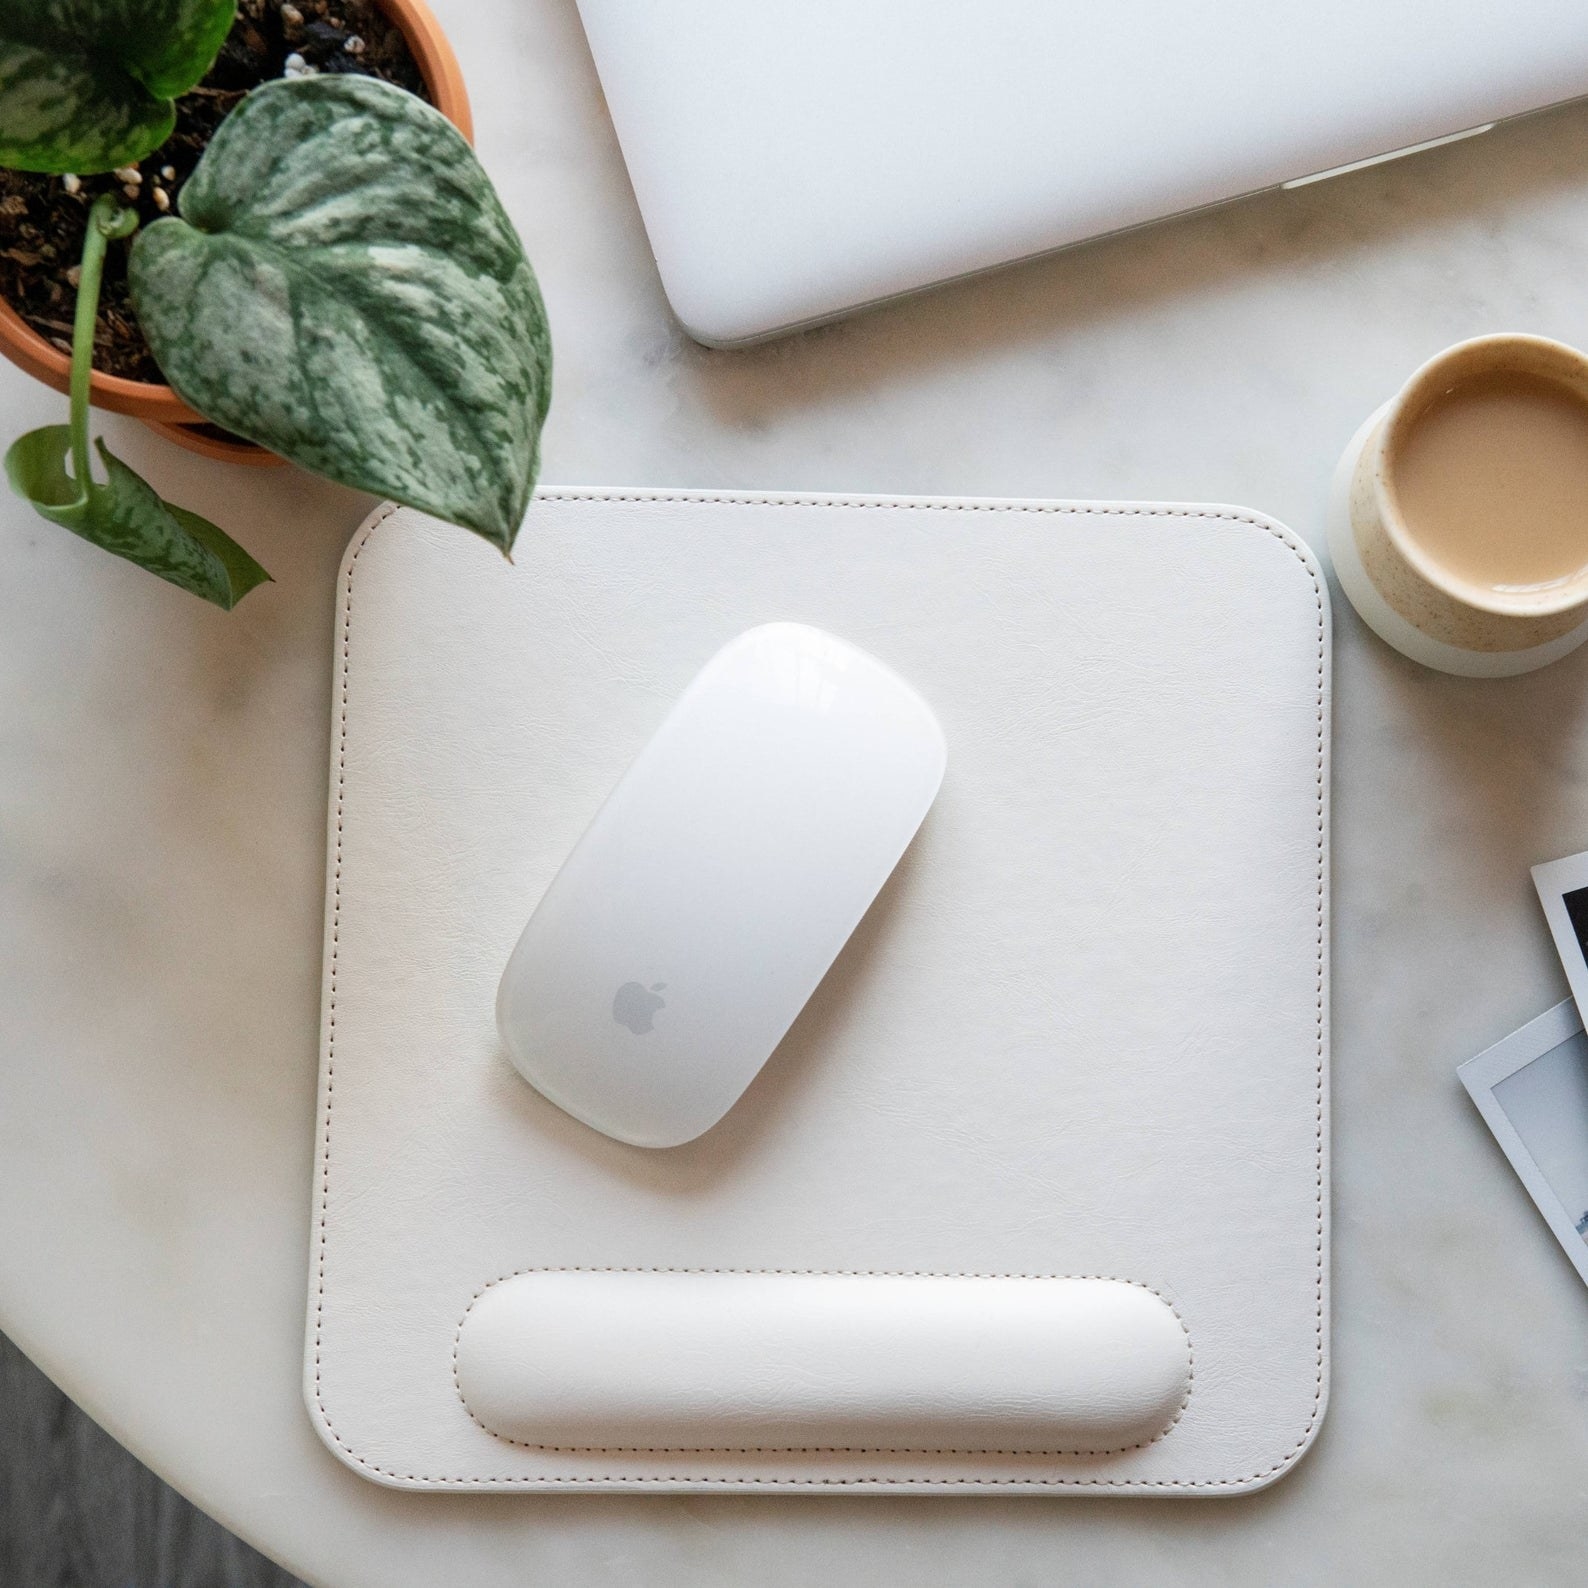 product image of white mousepad with wrist rest with Apple mouse on it